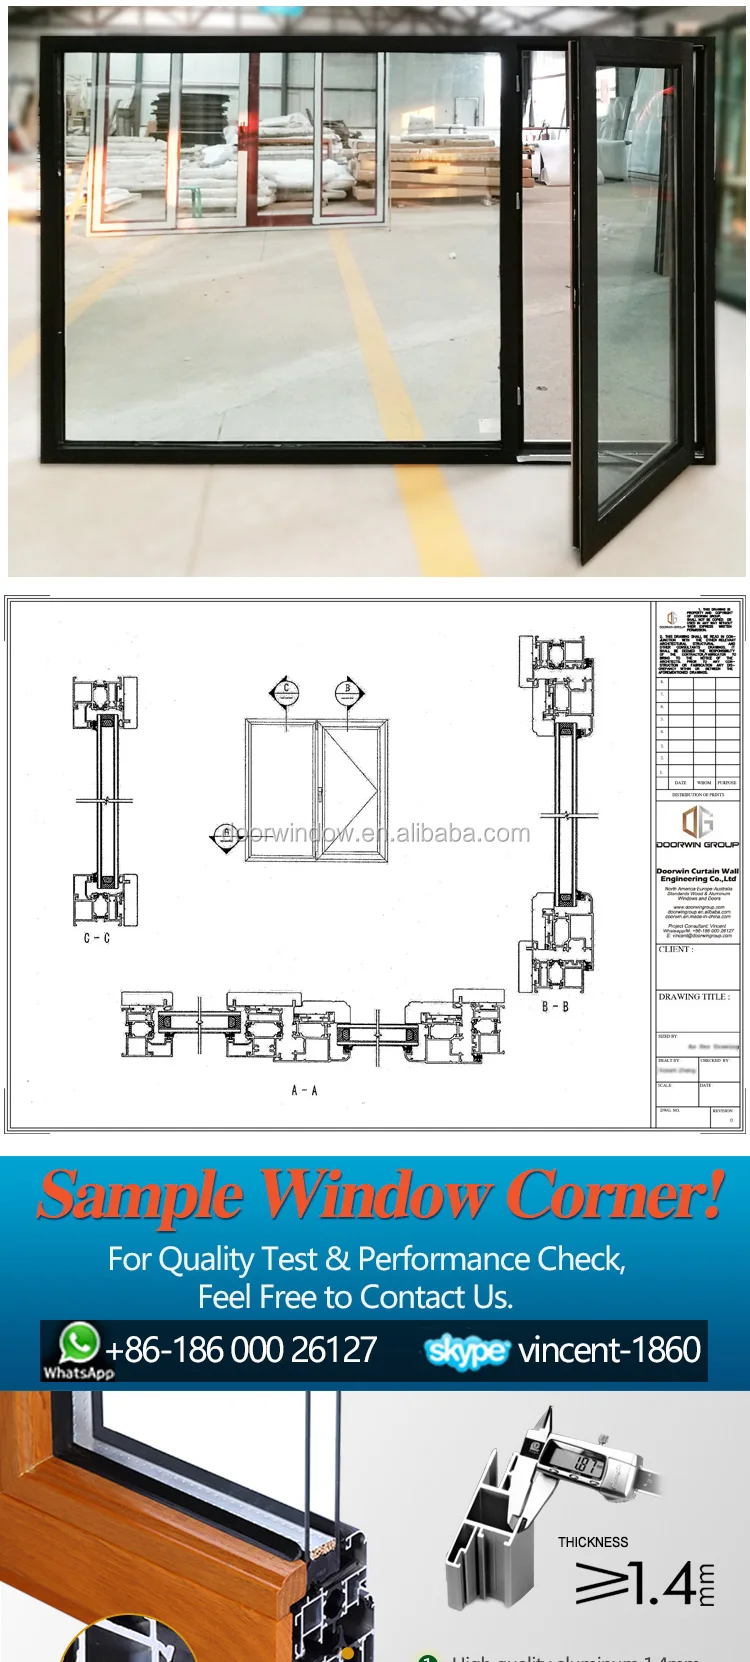 China factory supplied top quality commercial door window inserts building windows aluminium